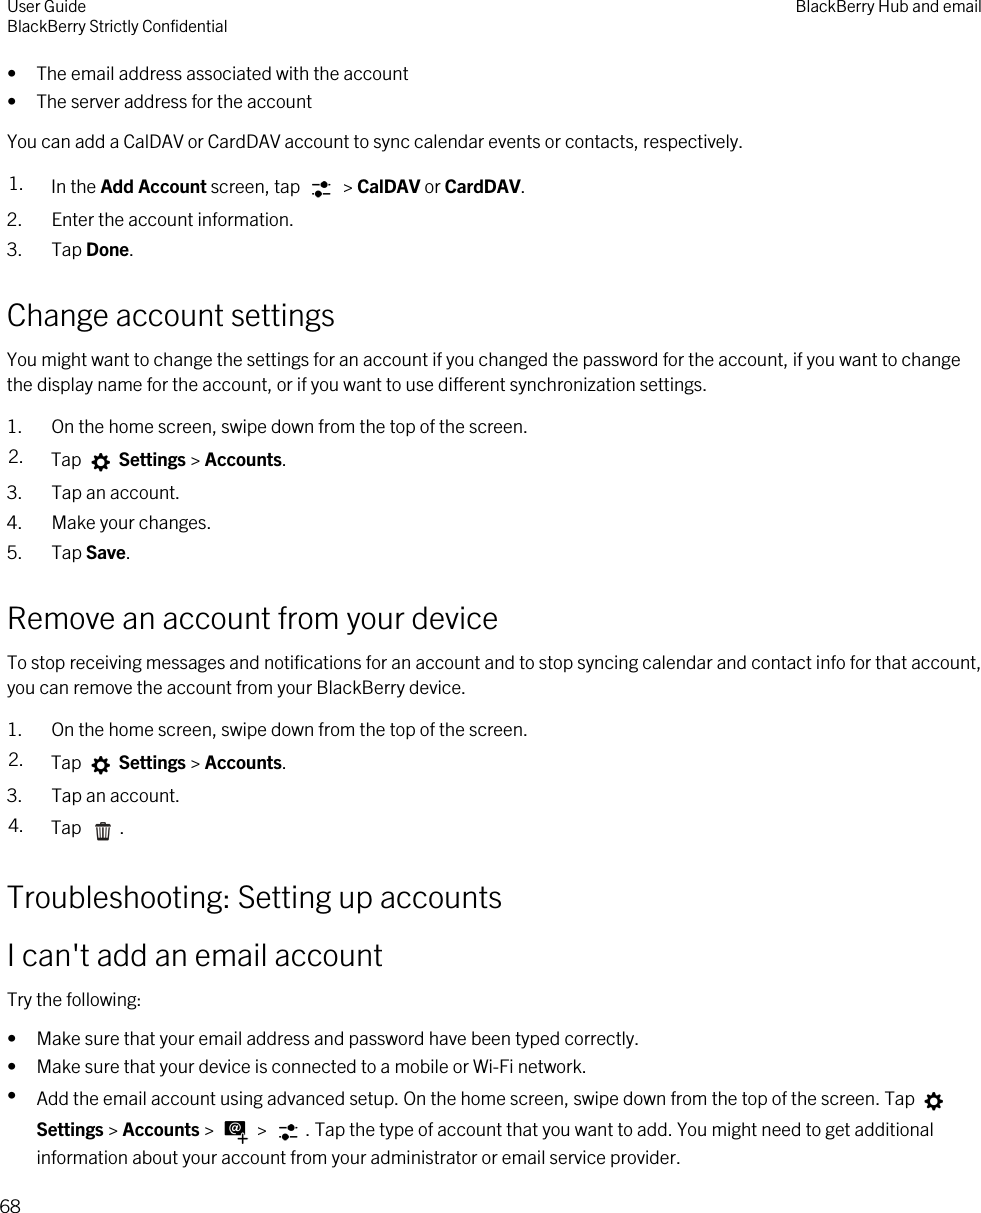 • The email address associated with the account• The server address for the accountYou can add a CalDAV or CardDAV account to sync calendar events or contacts, respectively.1. In the Add Account screen, tap   &gt; CalDAV or CardDAV.2. Enter the account information.3. Tap Done.Change account settingsYou might want to change the settings for an account if you changed the password for the account, if you want to change the display name for the account, or if you want to use different synchronization settings.1. On the home screen, swipe down from the top of the screen.2. Tap   Settings &gt; Accounts.3. Tap an account.4. Make your changes.5. Tap Save.Remove an account from your deviceTo stop receiving messages and notifications for an account and to stop syncing calendar and contact info for that account, you can remove the account from your BlackBerry device.1. On the home screen, swipe down from the top of the screen.2. Tap   Settings &gt; Accounts.3. Tap an account.4. Tap  .Troubleshooting: Setting up accountsI can&apos;t add an email accountTry the following:• Make sure that your email address and password have been typed correctly.• Make sure that your device is connected to a mobile or Wi-Fi network.•Add the email account using advanced setup. On the home screen, swipe down from the top of the screen. Tap Settings &gt; Accounts &gt;   &gt;  . Tap the type of account that you want to add. You might need to get additional information about your account from your administrator or email service provider.User GuideBlackBerry Strictly Confidential BlackBerry Hub and email68